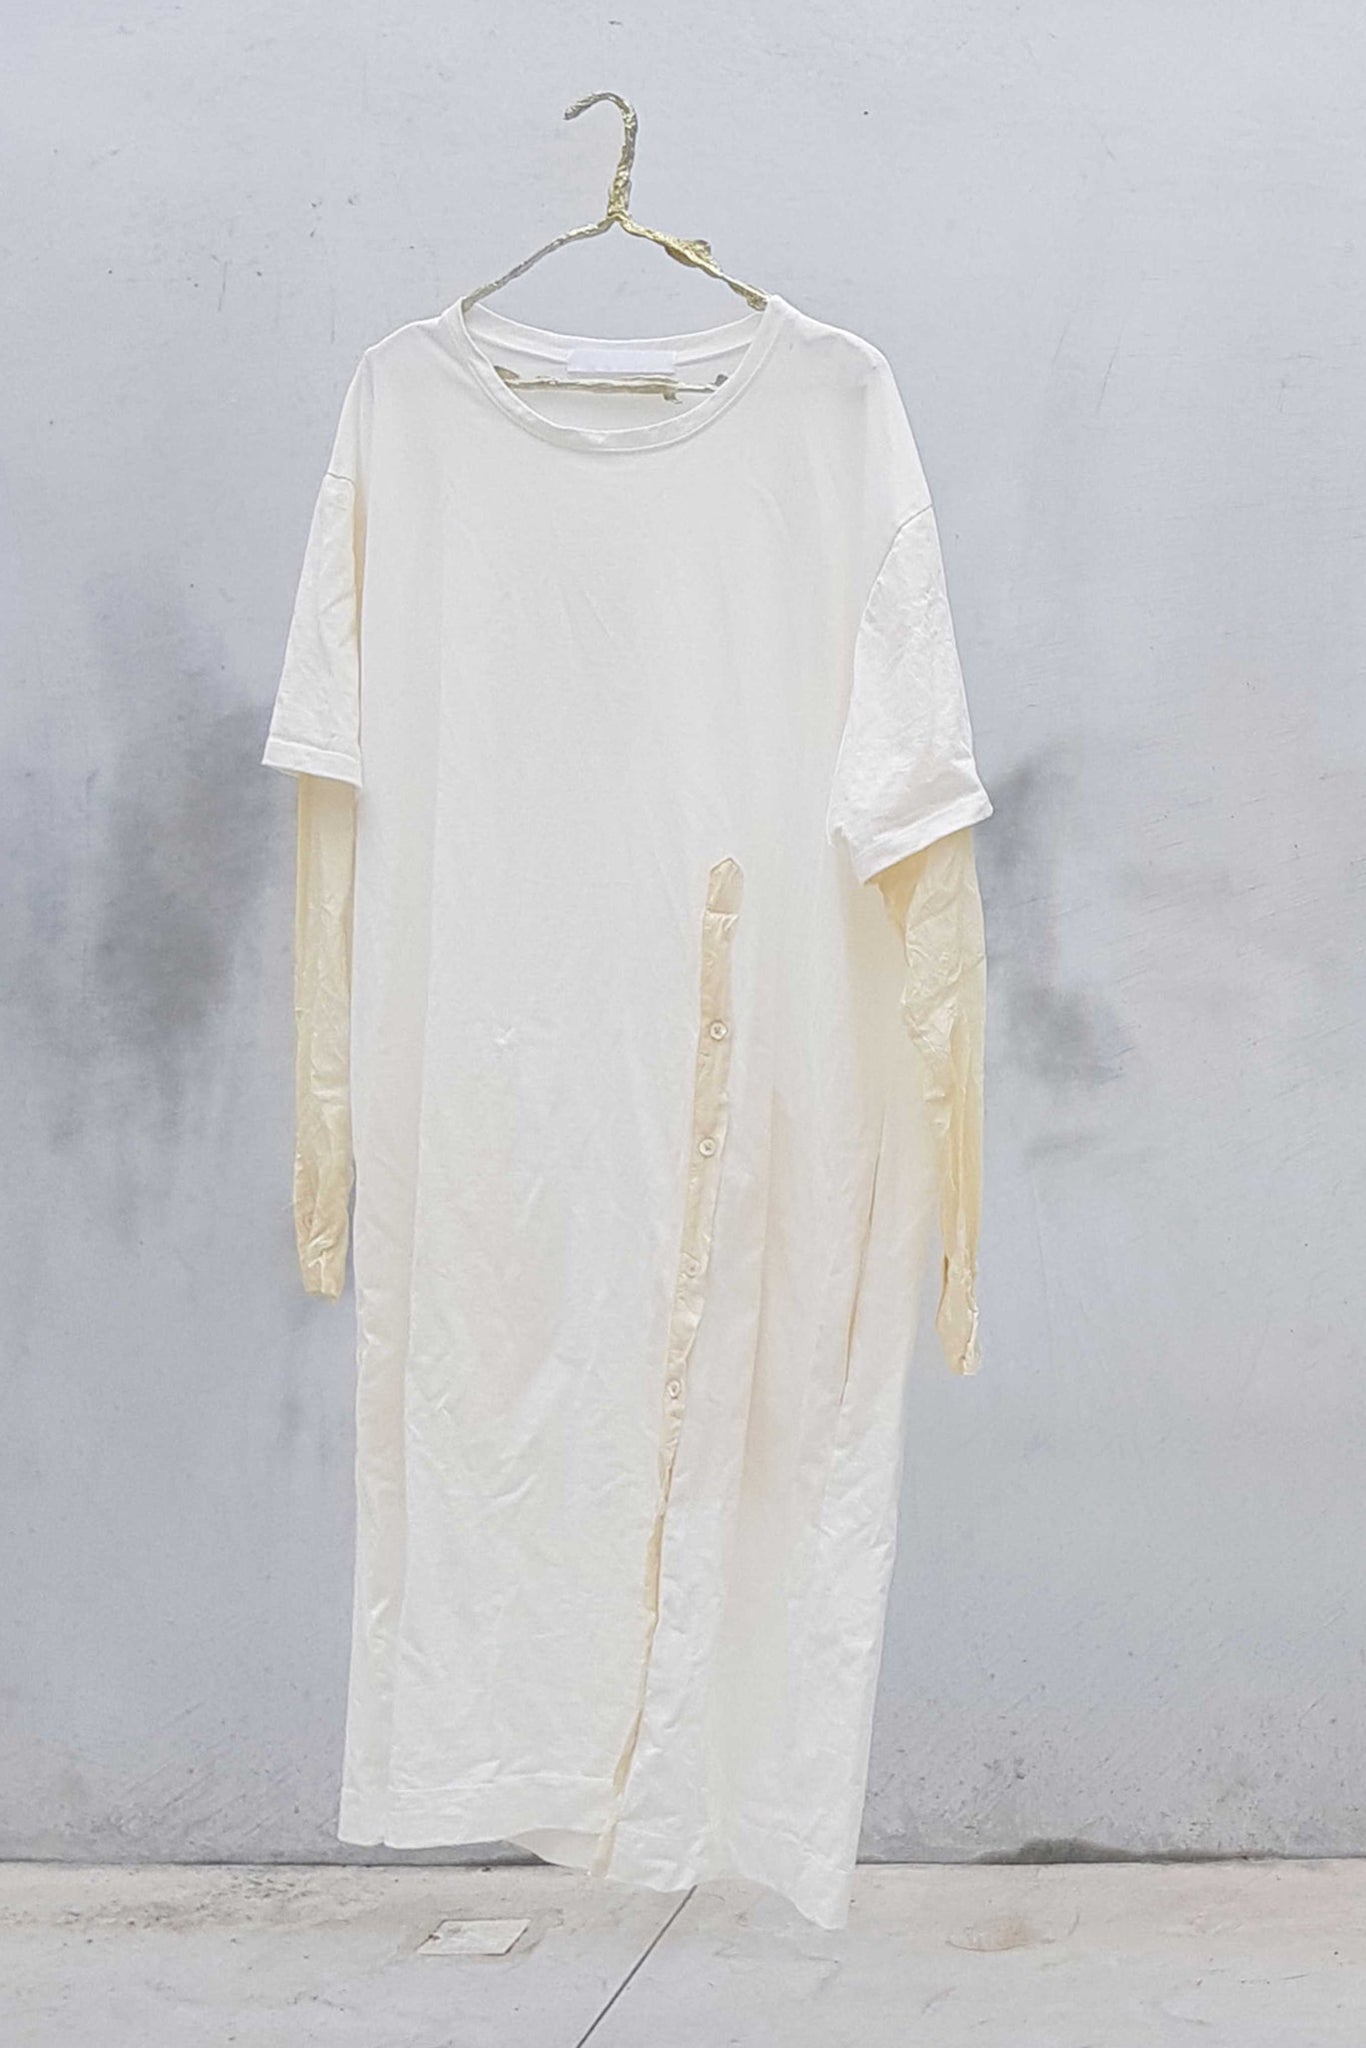 T-Shirt Dress with Arms | Japanese Cotton + Vintage Silk